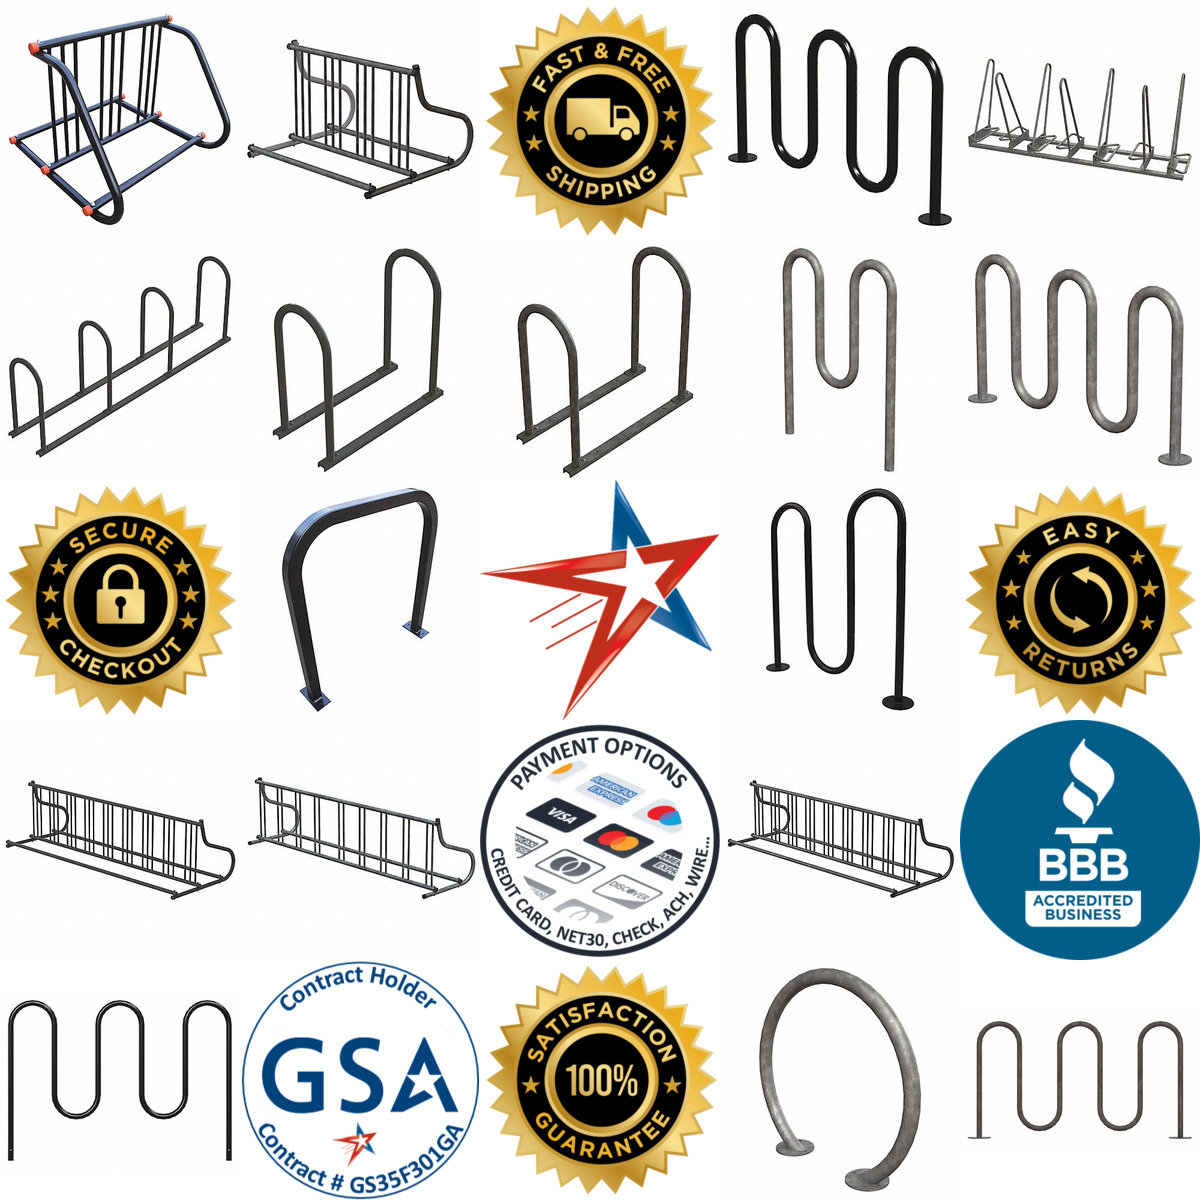 A selection of Bike Racks products on GoVets